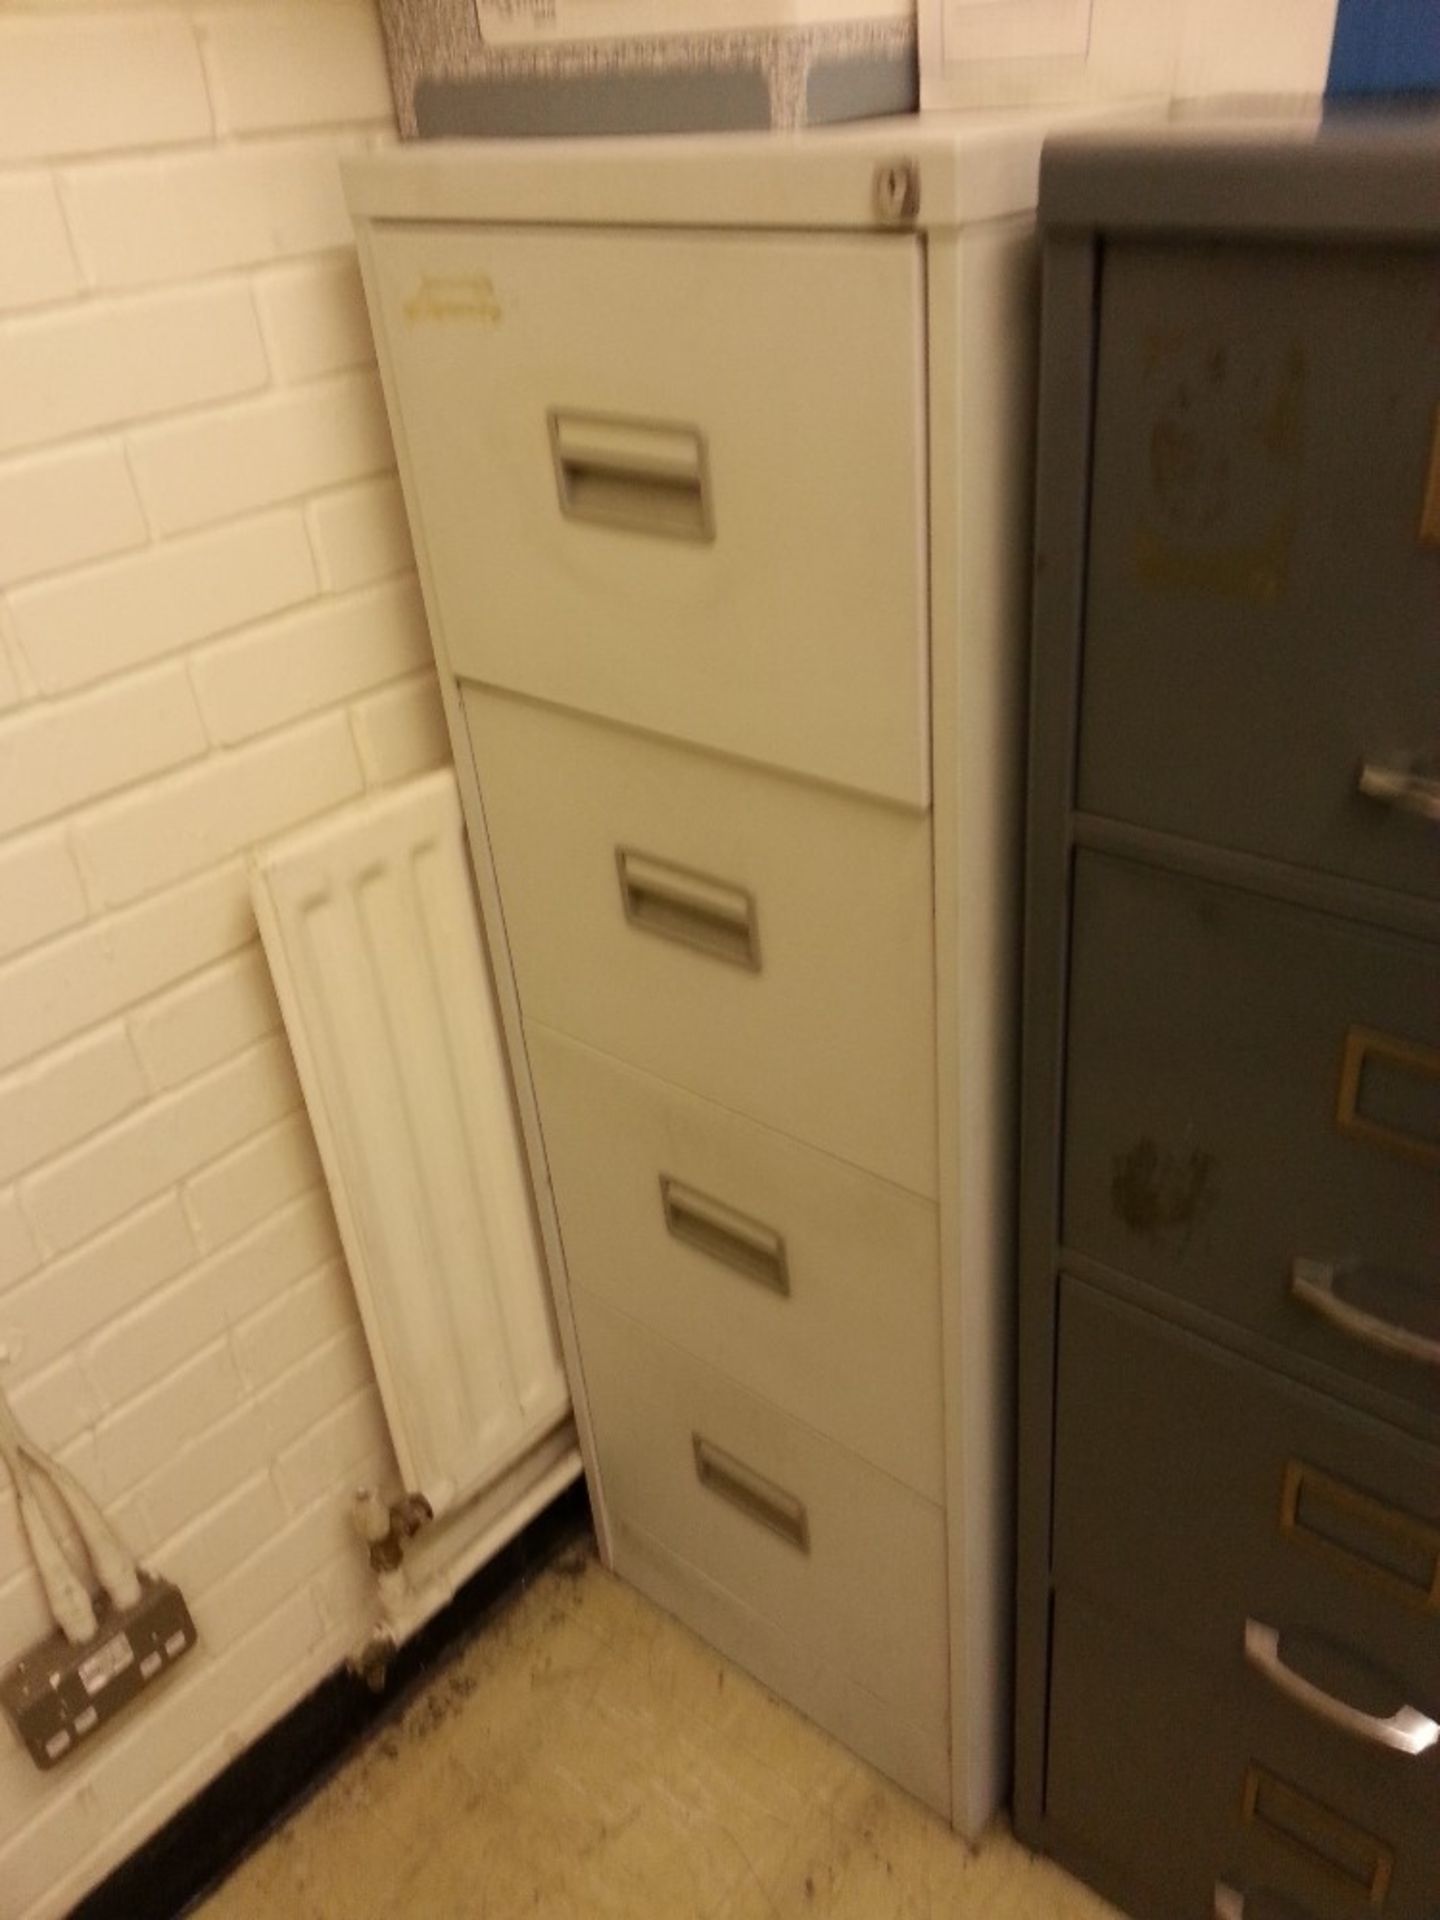 4 drawer metal filing cabinet Located in Gateshead Tyne and Wear collection Friday 24th till